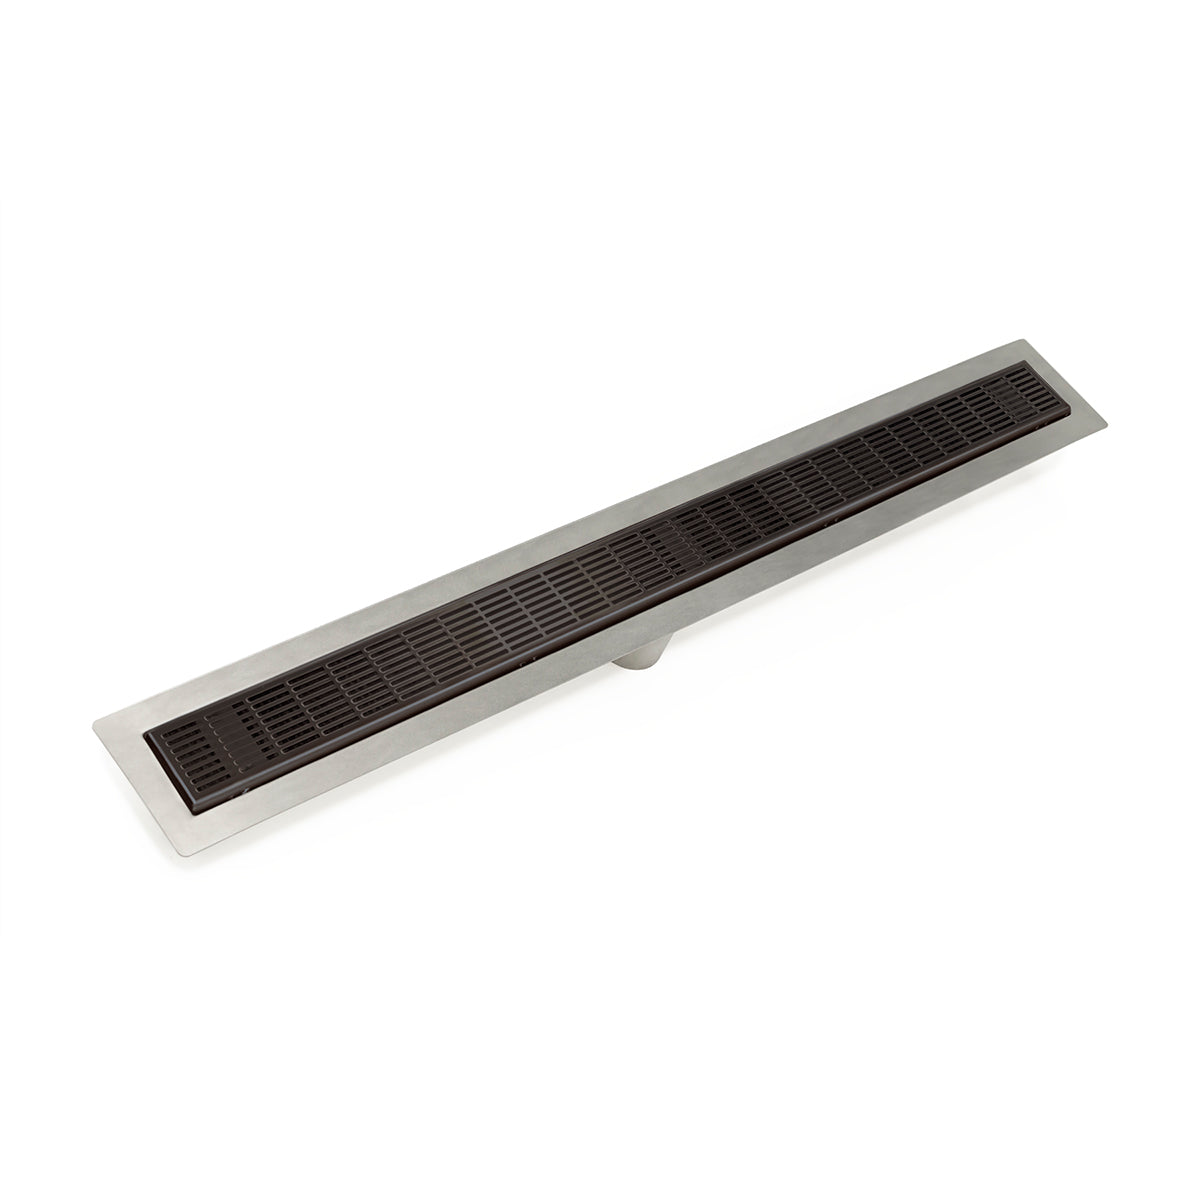 Infinity Drain 48" FF Series Fixed Flange Linear Drain Kit with 2 1/2" Perforated Slotted Grate